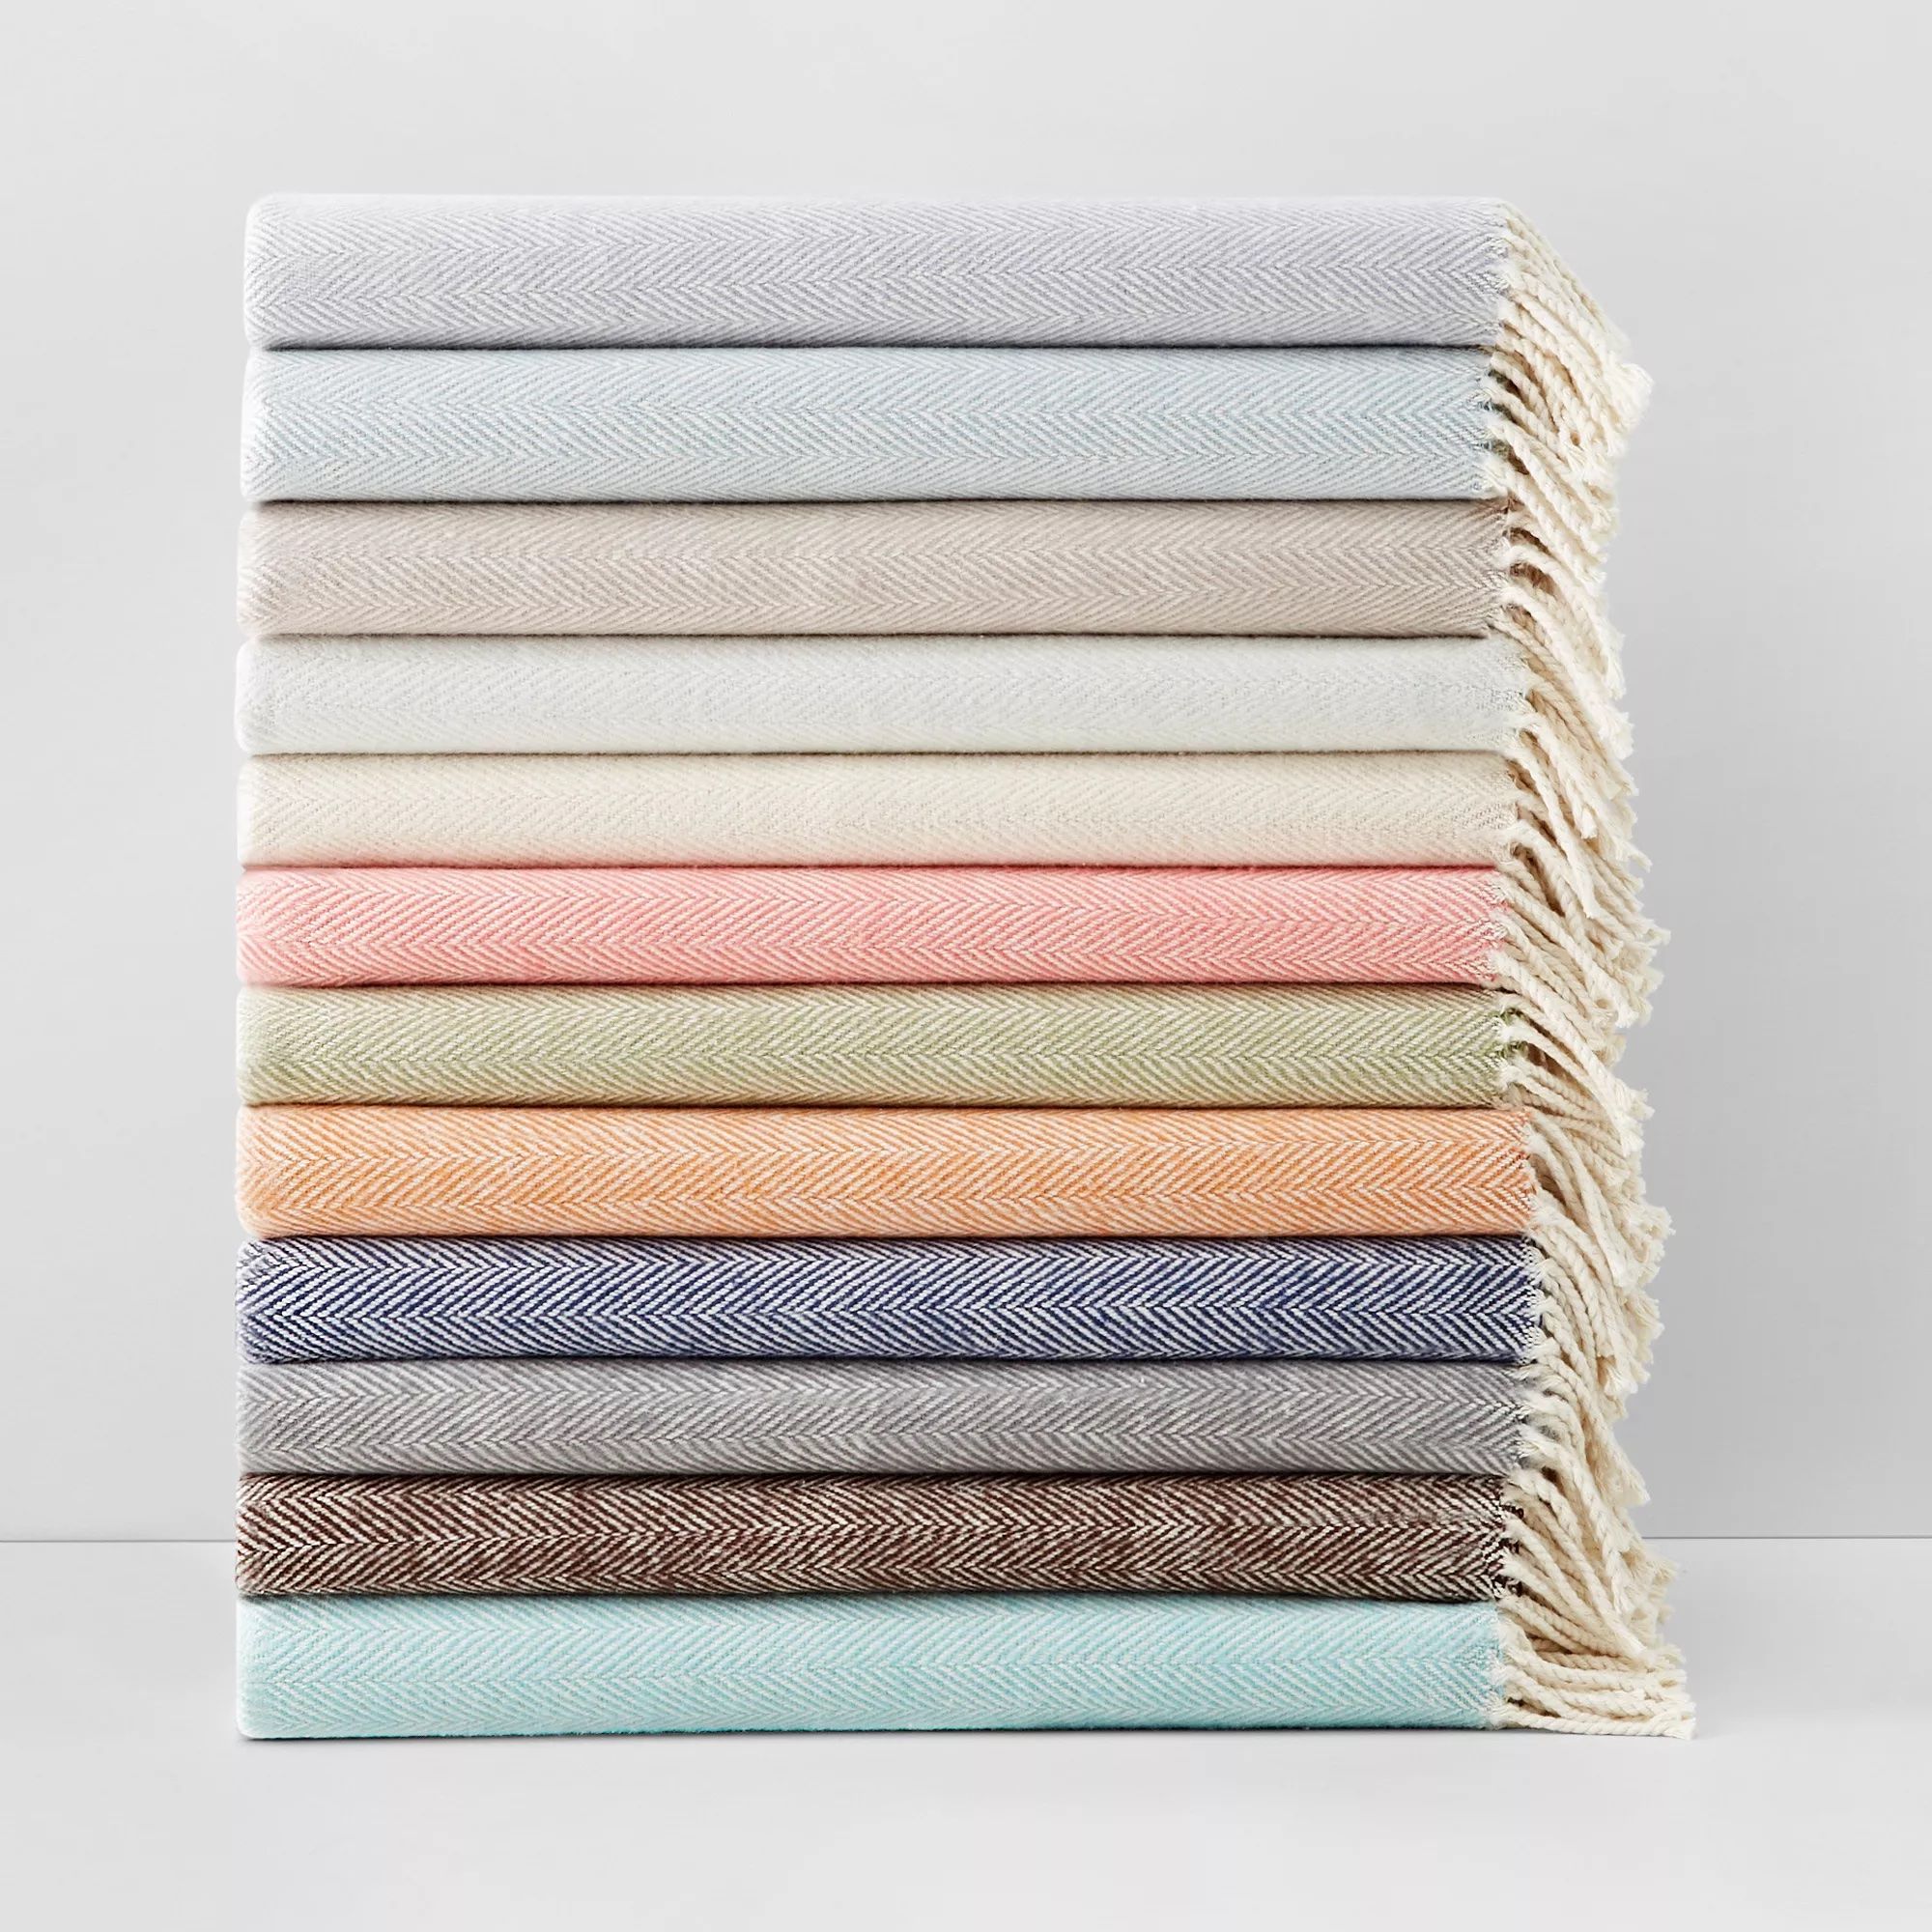 13 Cozy Throw Blankets of 2022 to Ward Off Chilly Nights